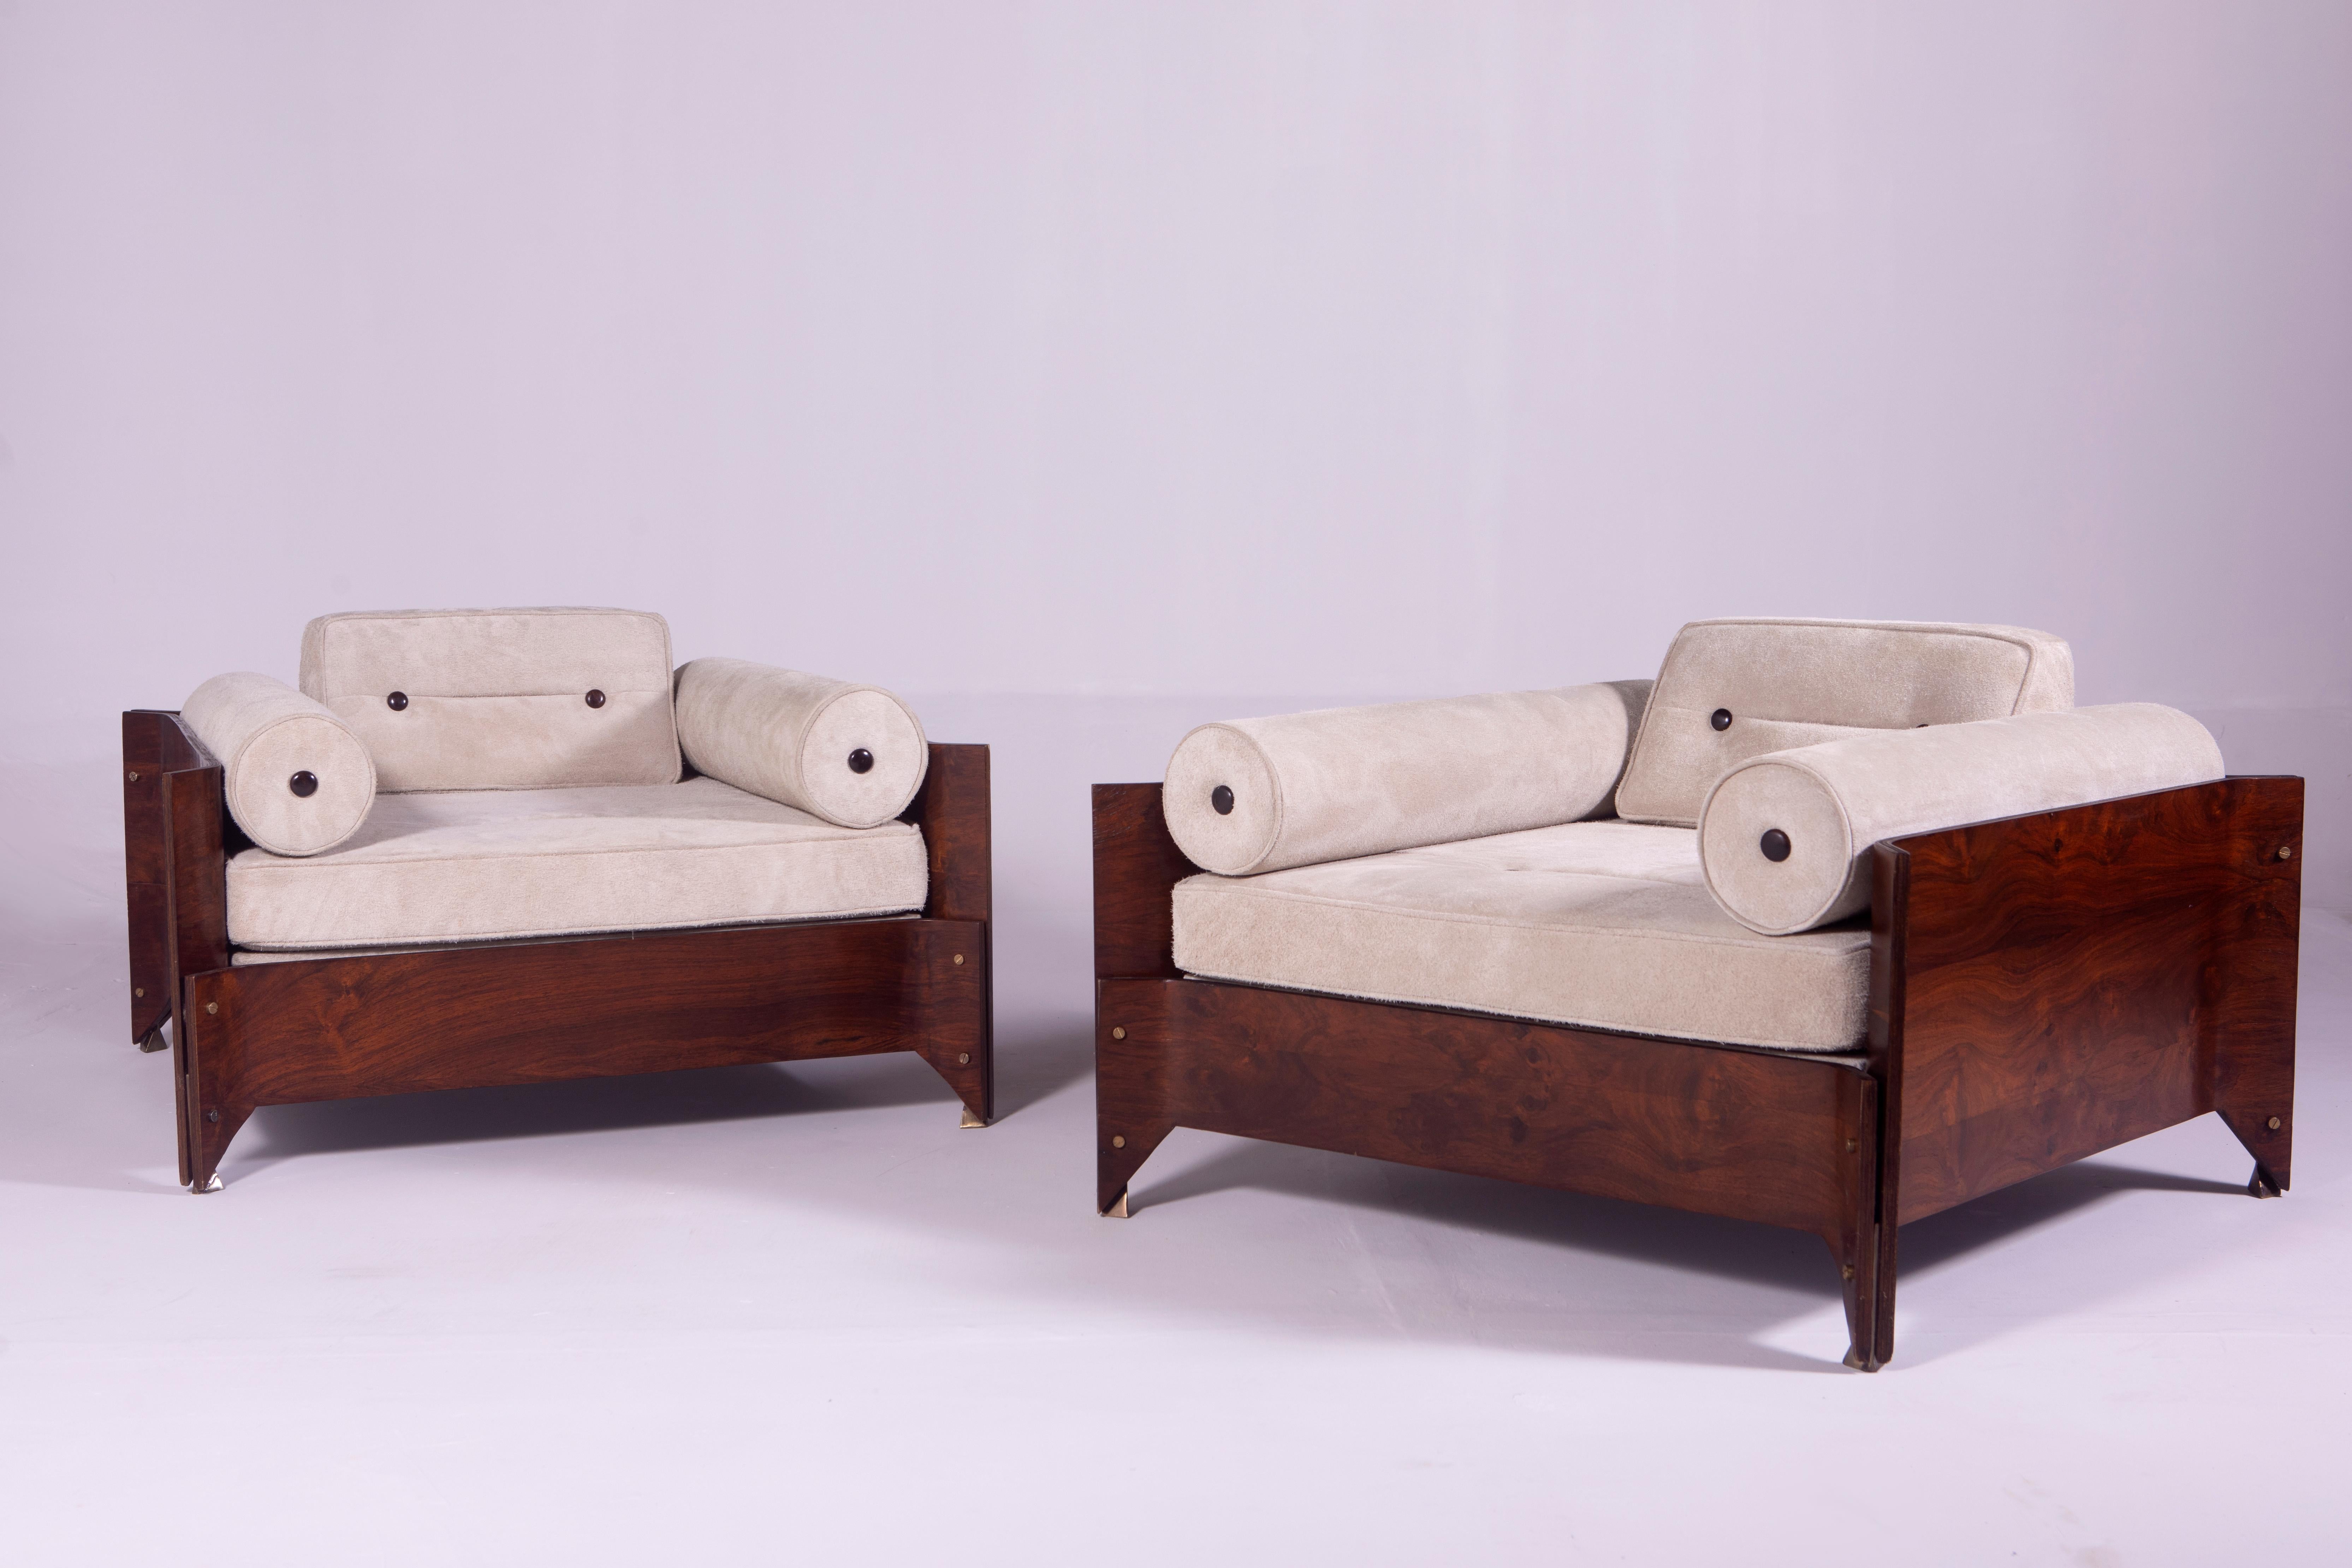 Mid-Century Modern Pair of Brasiliana Armchairs by Jorge Zalszupin, Brazil, 1960

Designed in 1965, the “Brasiliana” armchair pays homage to Brasília, the recently founded Brazilian capital by Oscar Niemeyer. It features a wood structure, voluminous